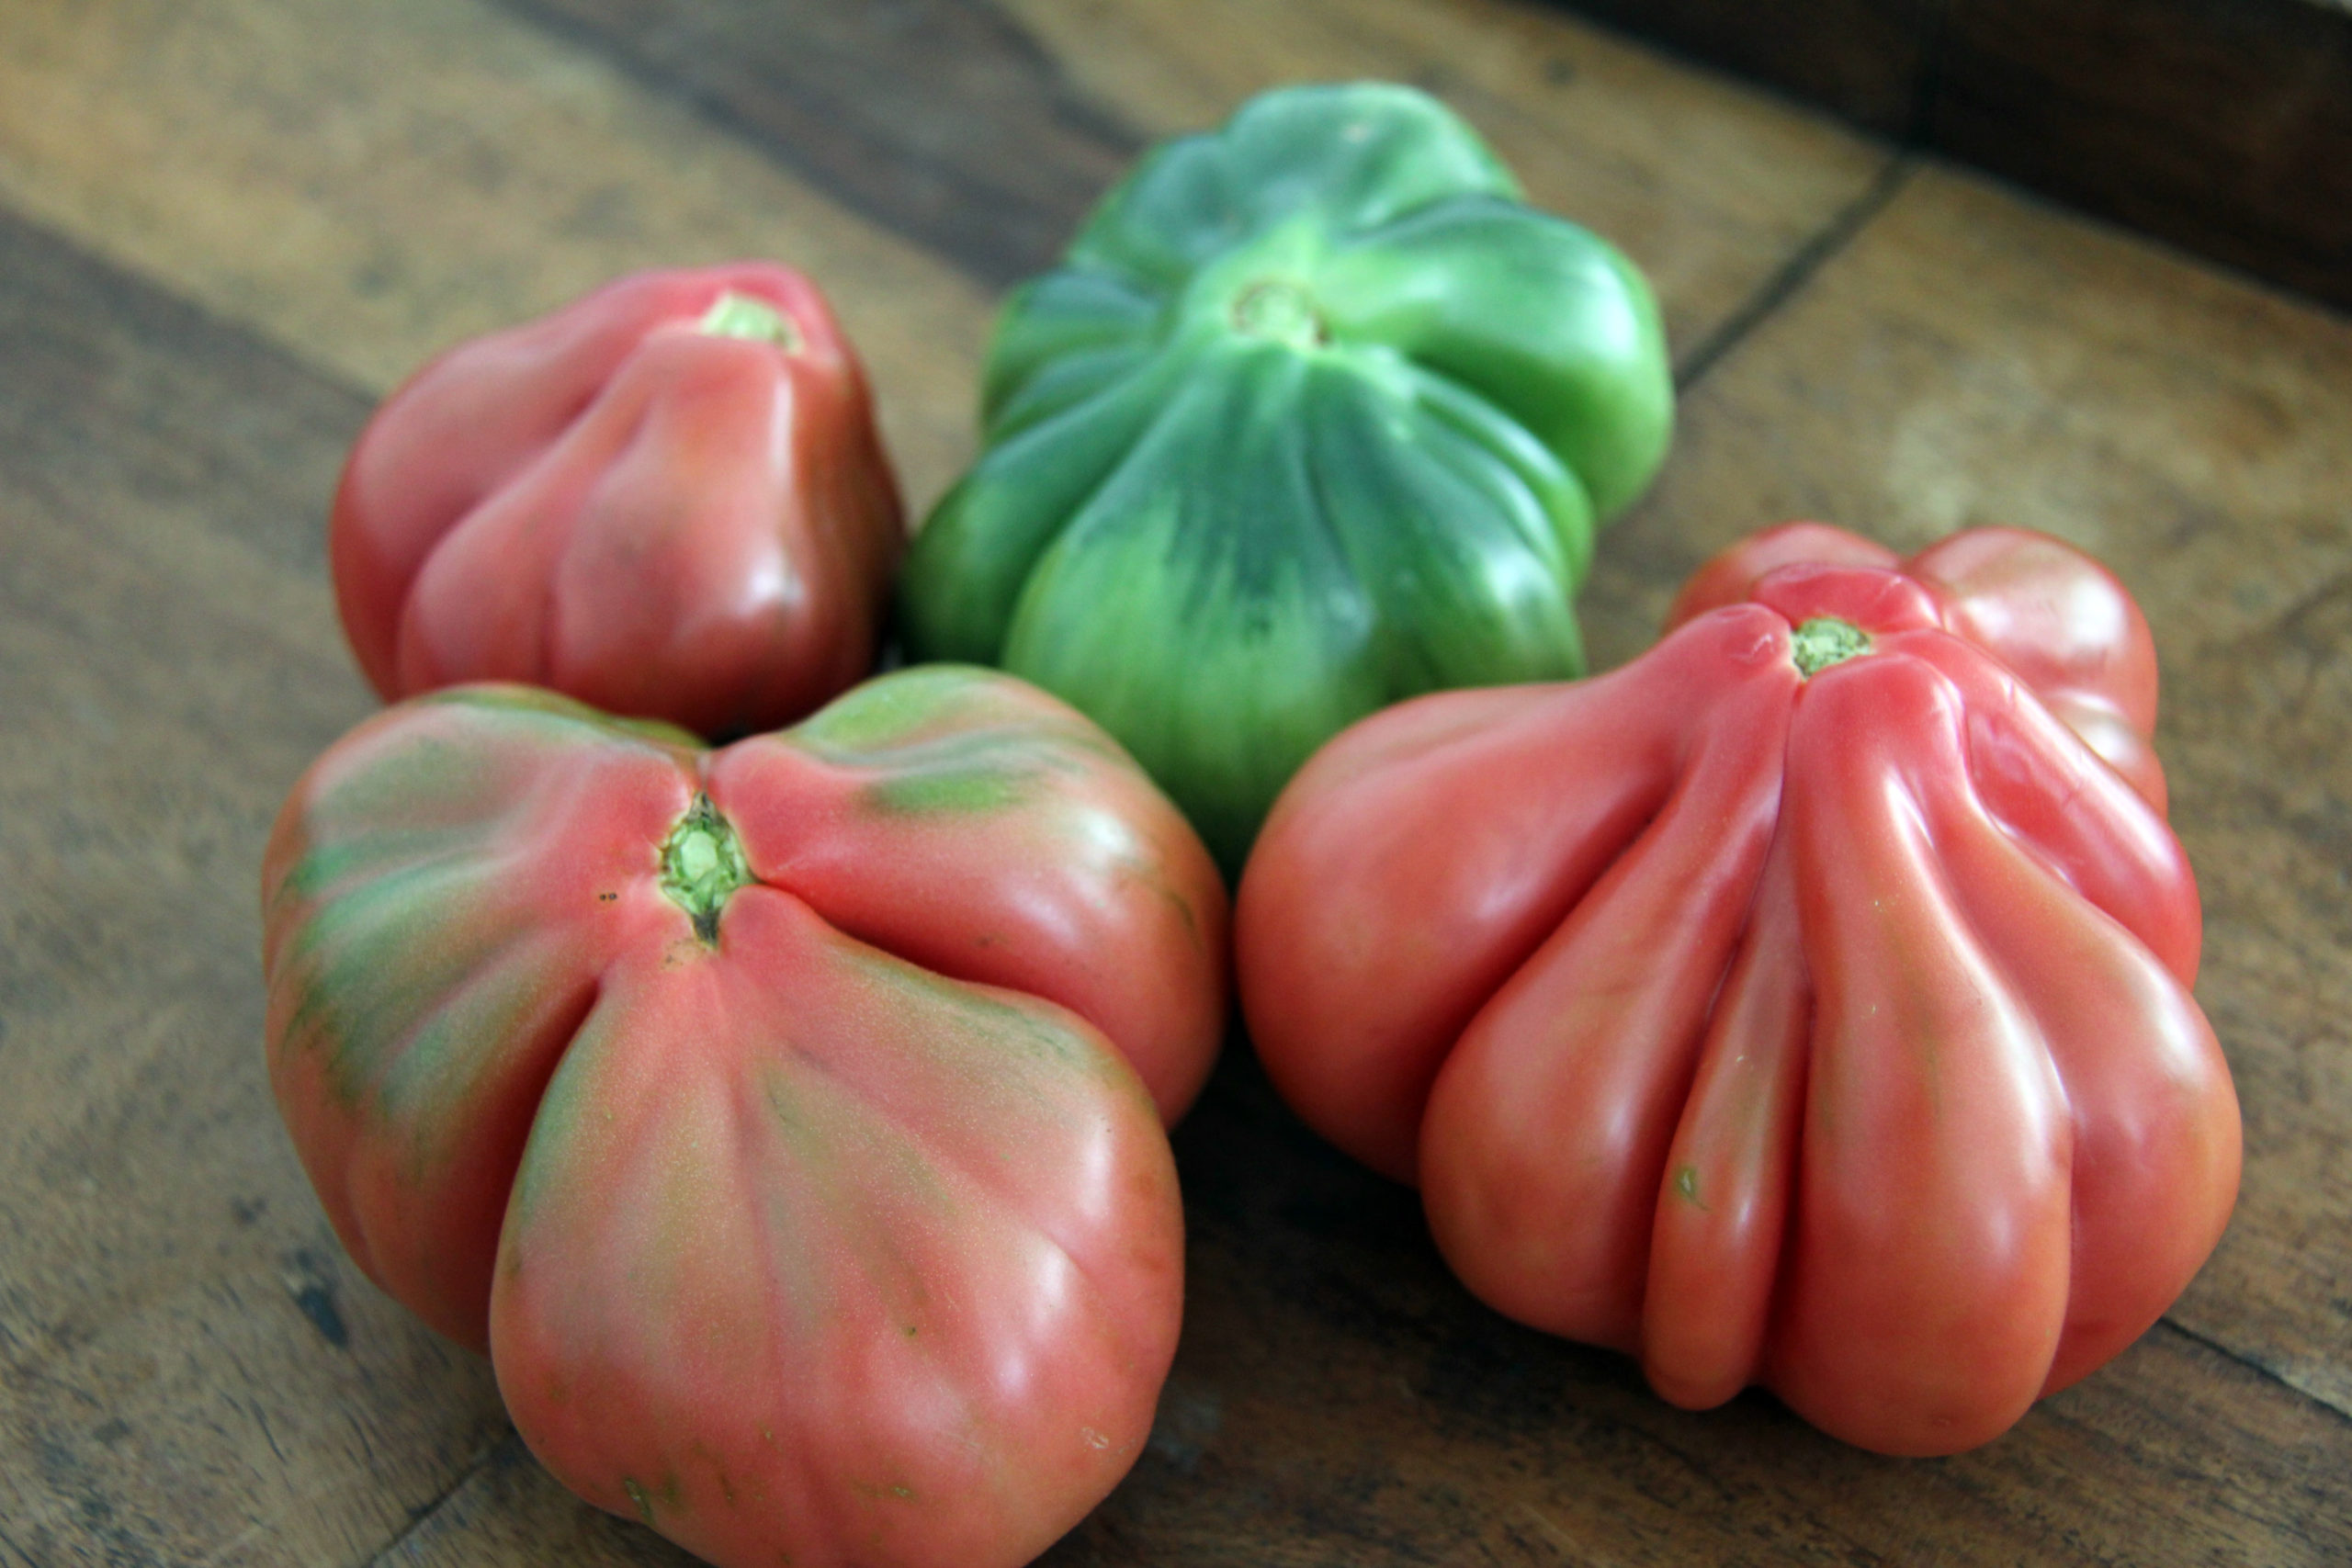 Is That Tomato Rotten Or Is It Safe to Eat?, Gardening Tips and How-To  Garden Guides